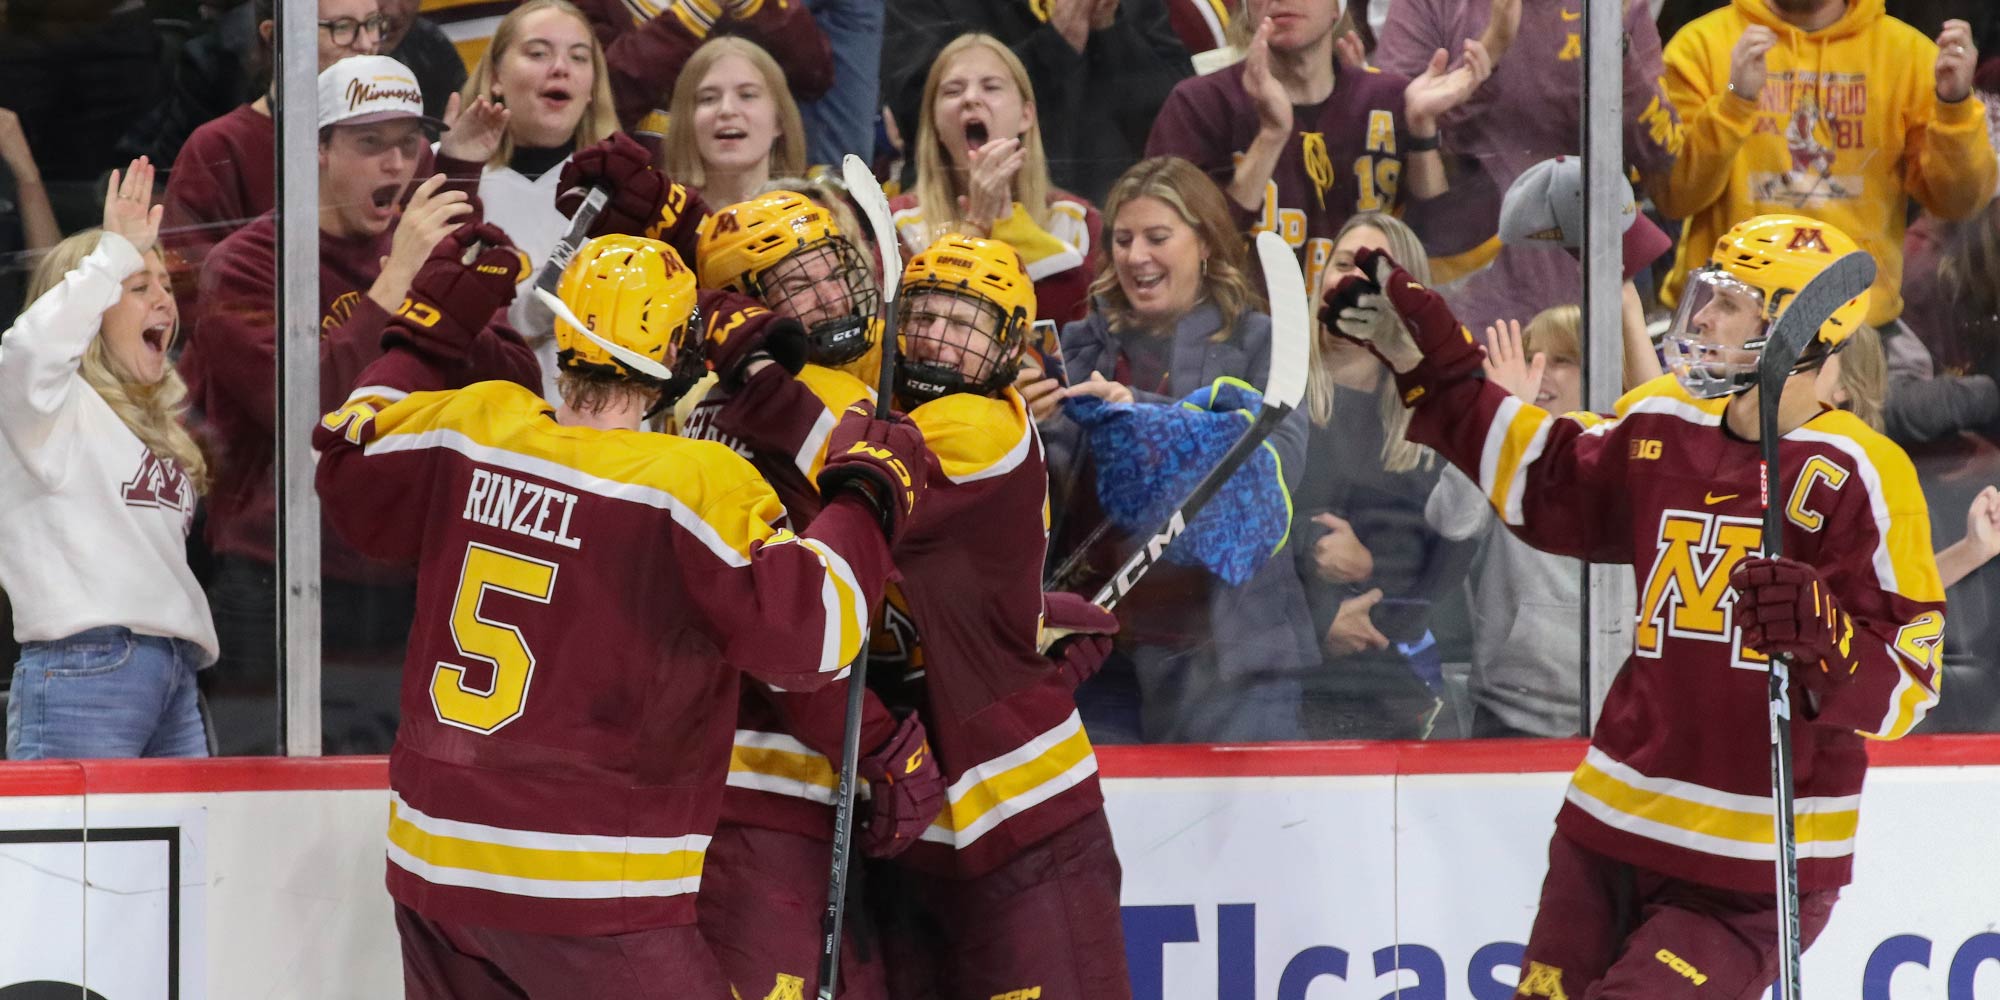 Gophers Win a Wild One at the X to Open 23-24 Season